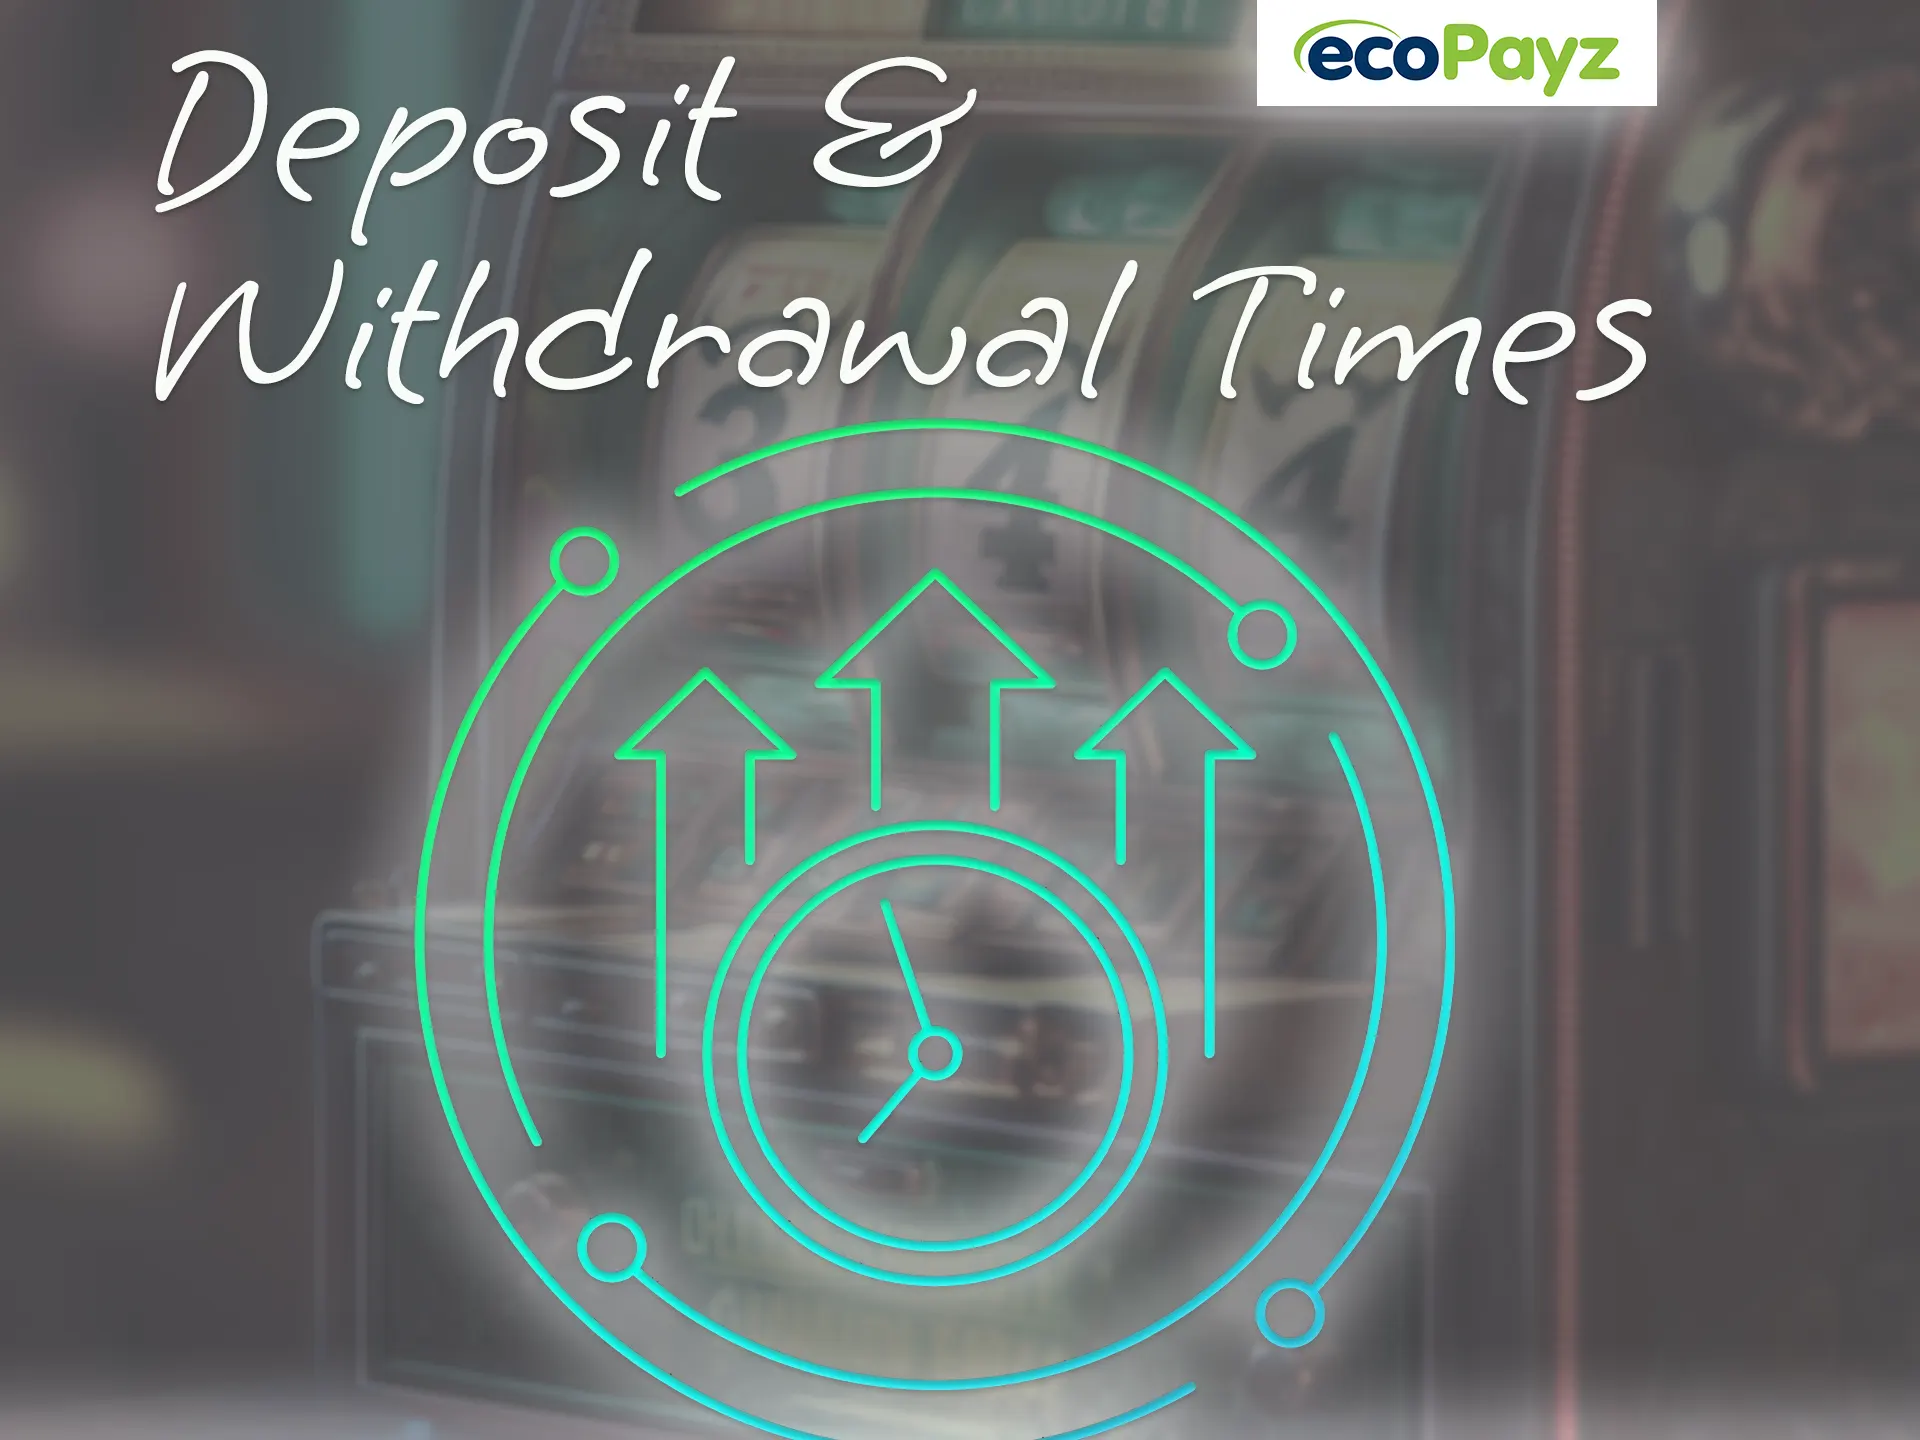 EcoPayz payments have a high processing speed.